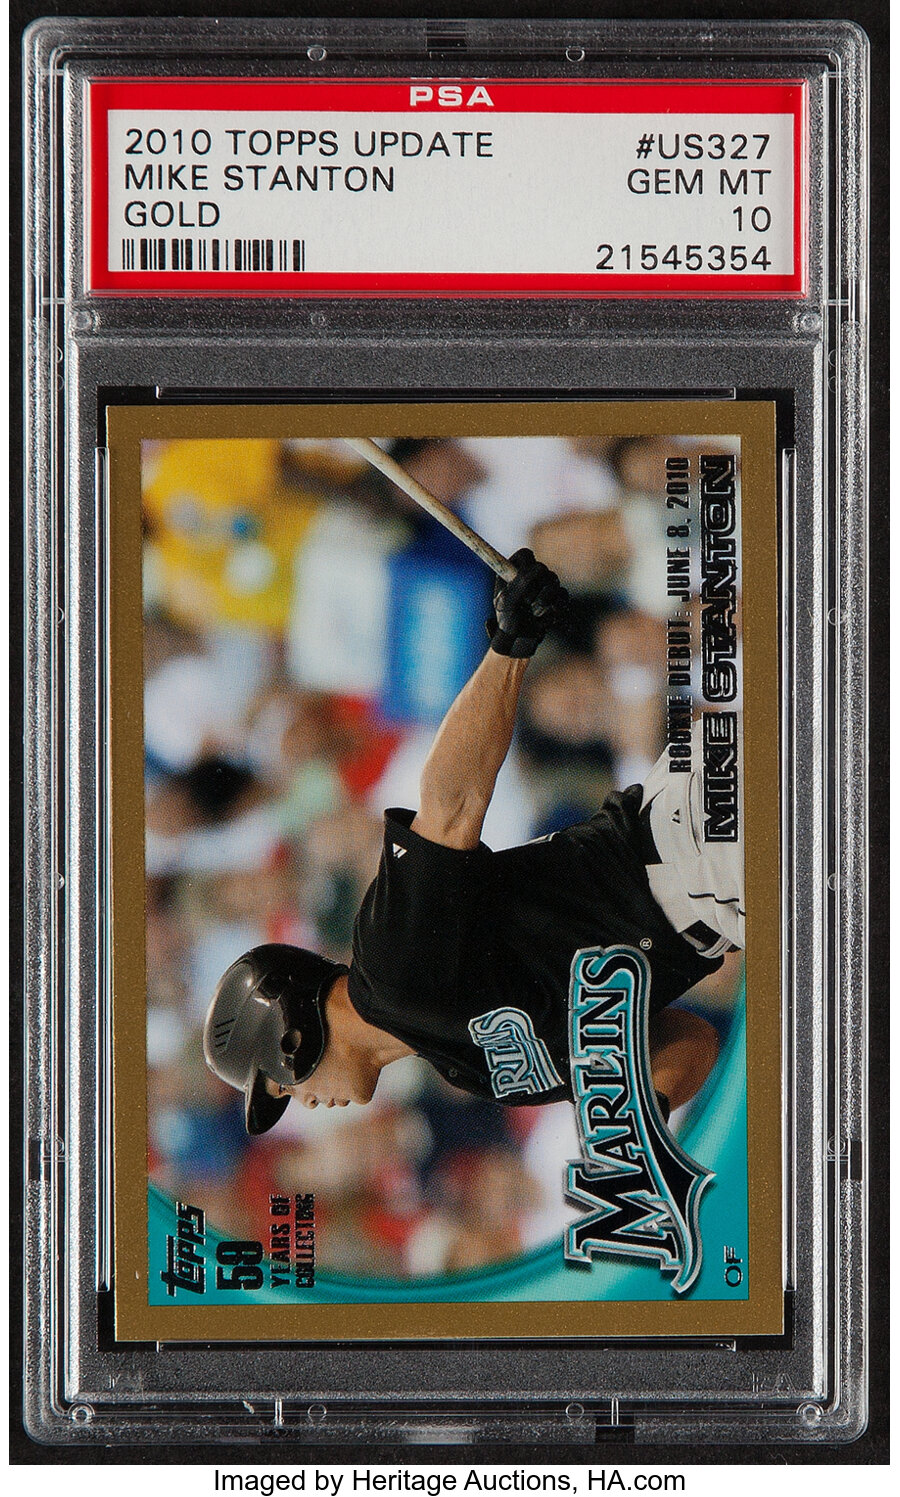 2010 Topps Update Mike "Giancarlo" Stanton (Gold) #US327 PSA Gem Mint 10 - Serial Numbered 735/2010